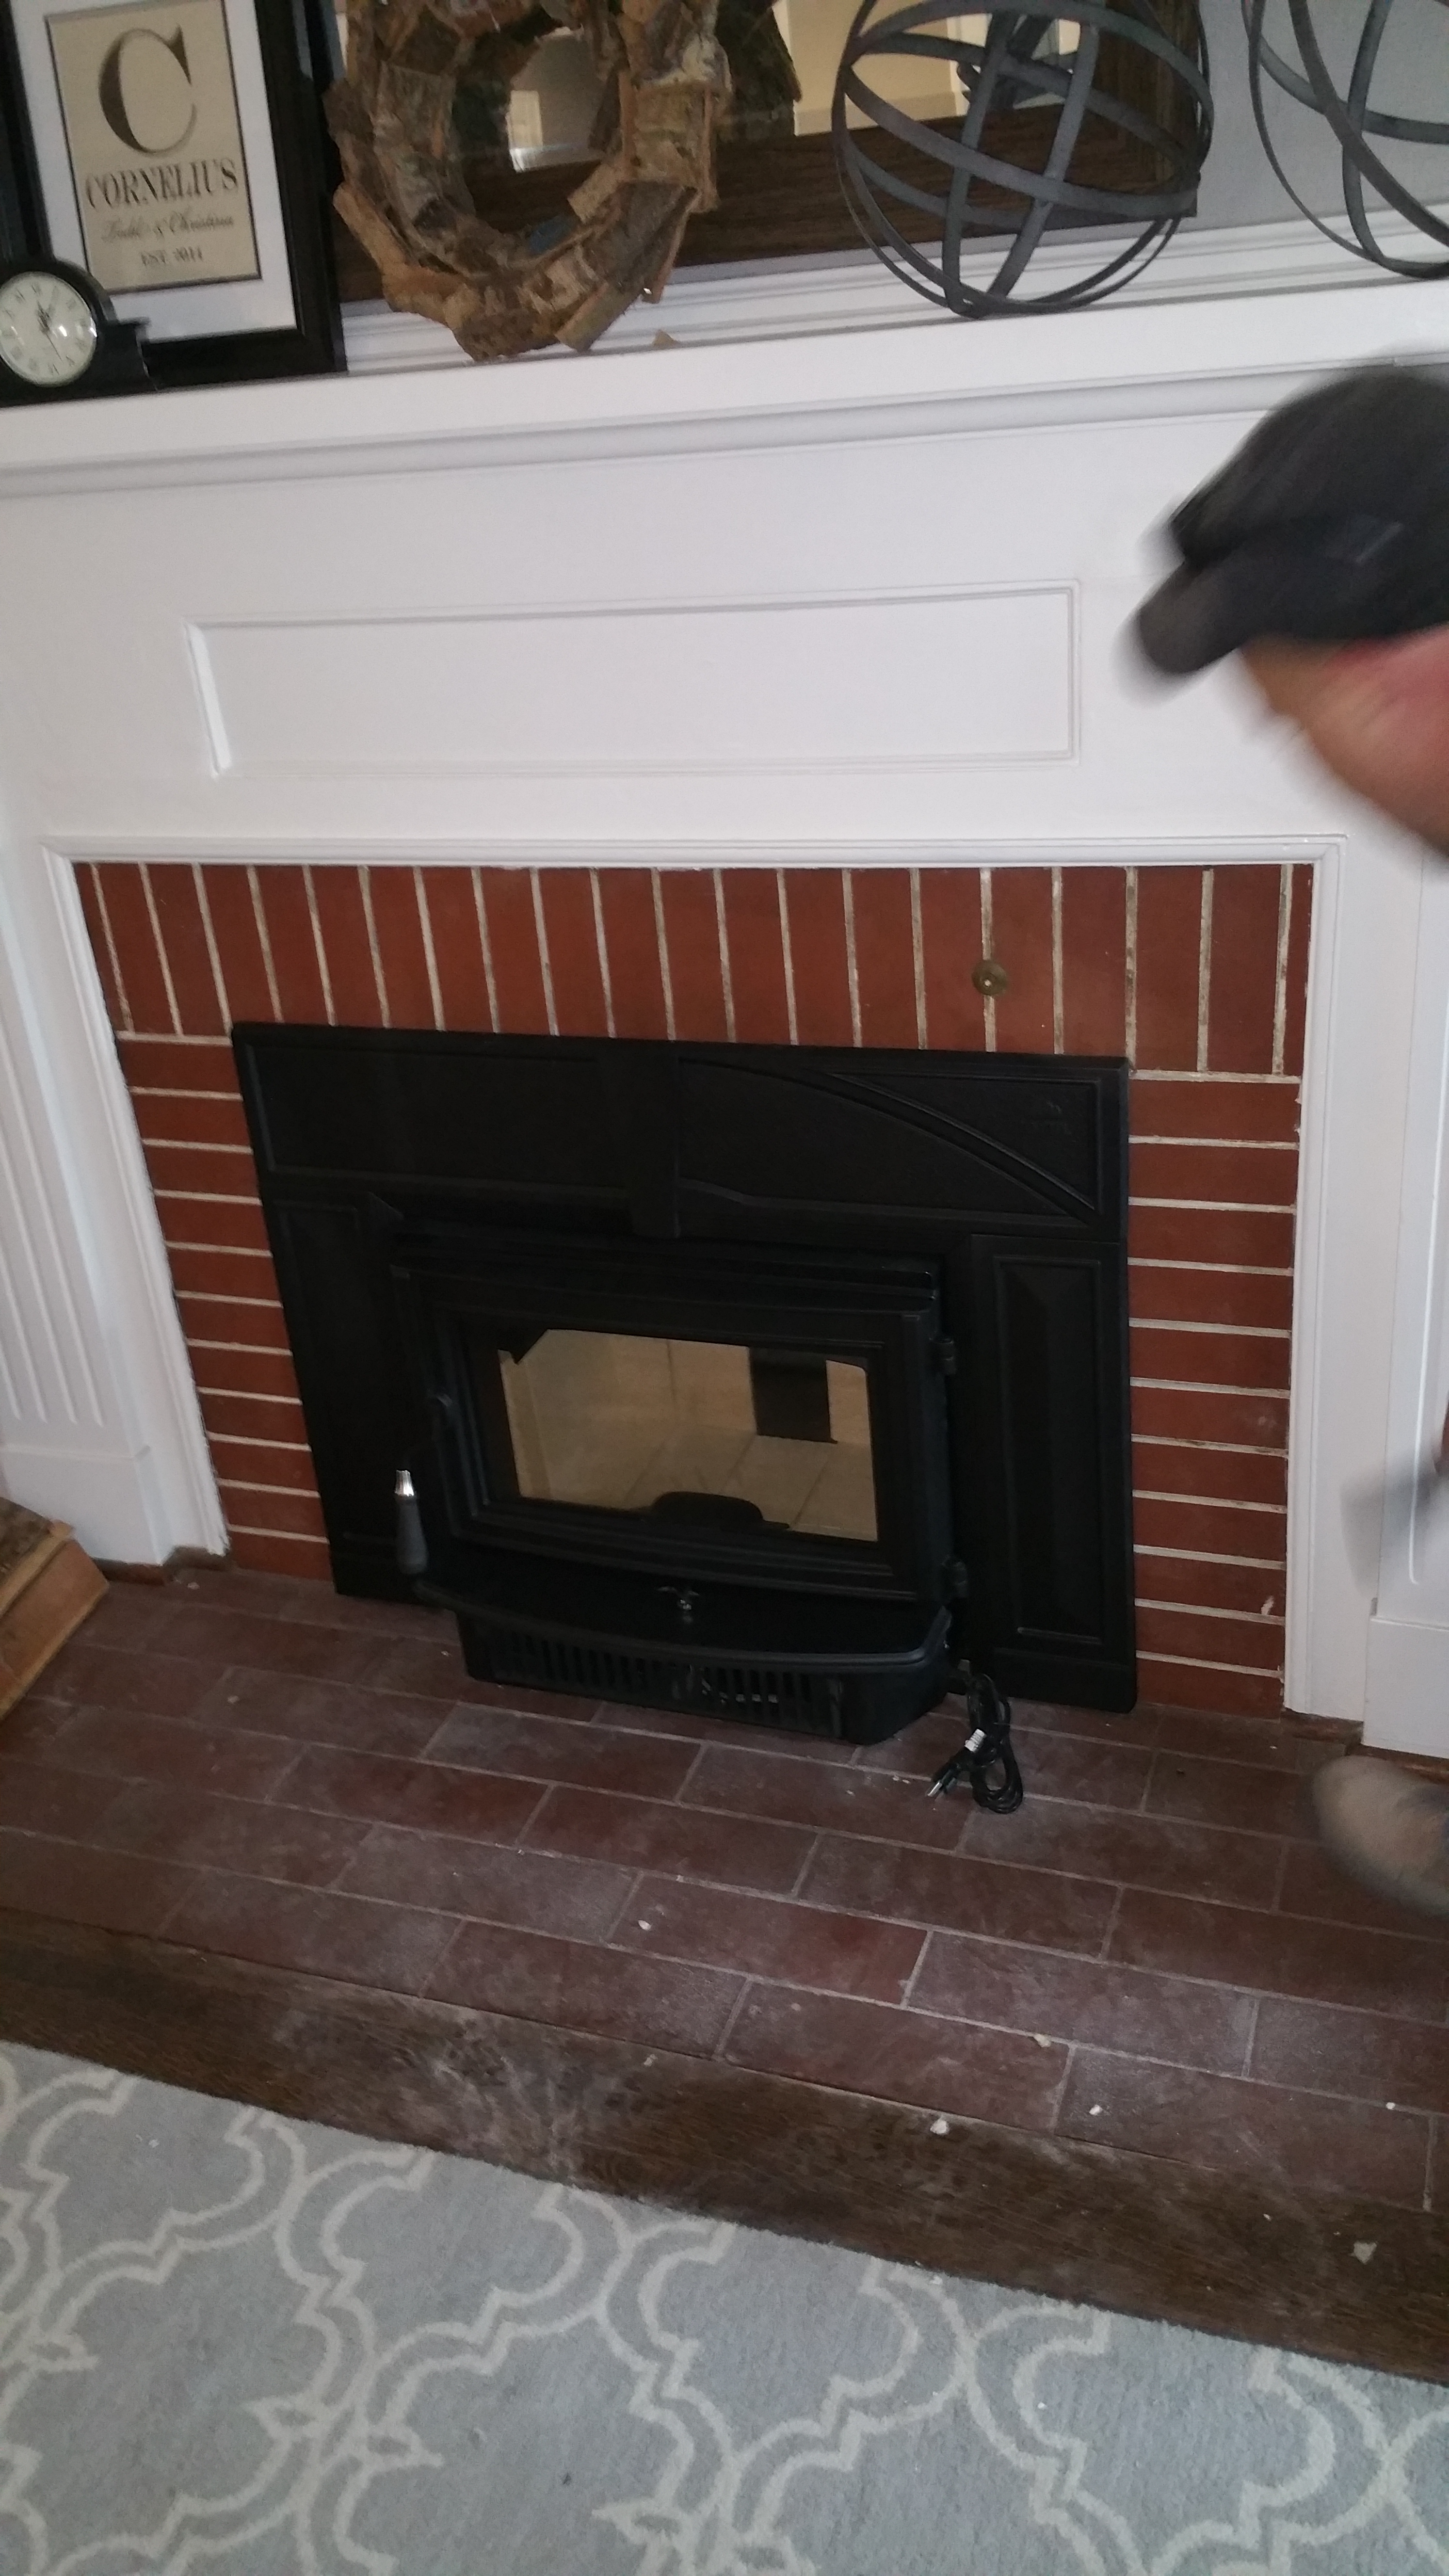 Here is another wood burning fireplace insert we installed this winter. we also added a stainless steel chimney liner for better draw, and more efficient burning.